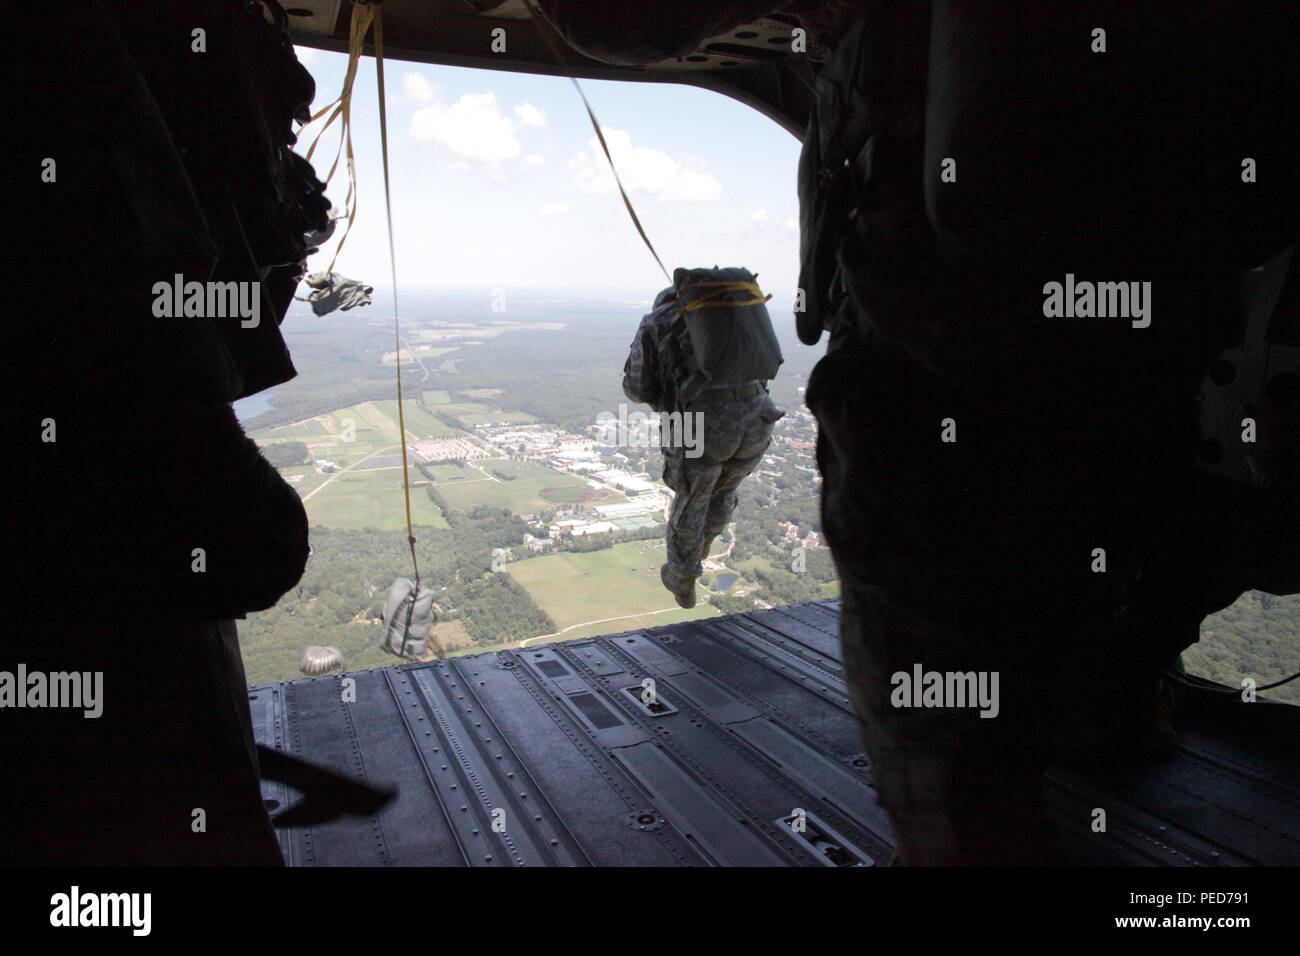 A U.S. Army paratrooper jumps from a CH-47 Chinook helicopter at Leapfest during the wing exchange jump in West Kingston, R.I., Aug. 3, 2015. Leapfest is an International parachute competition hosted by the 56th Troop Command, Rhode Island National Guard to promote high level technical training and esprit de corps within the International Airborne community. (U.S. Army Photo by Spc. Josephine Carlson/Released) Stock Photo